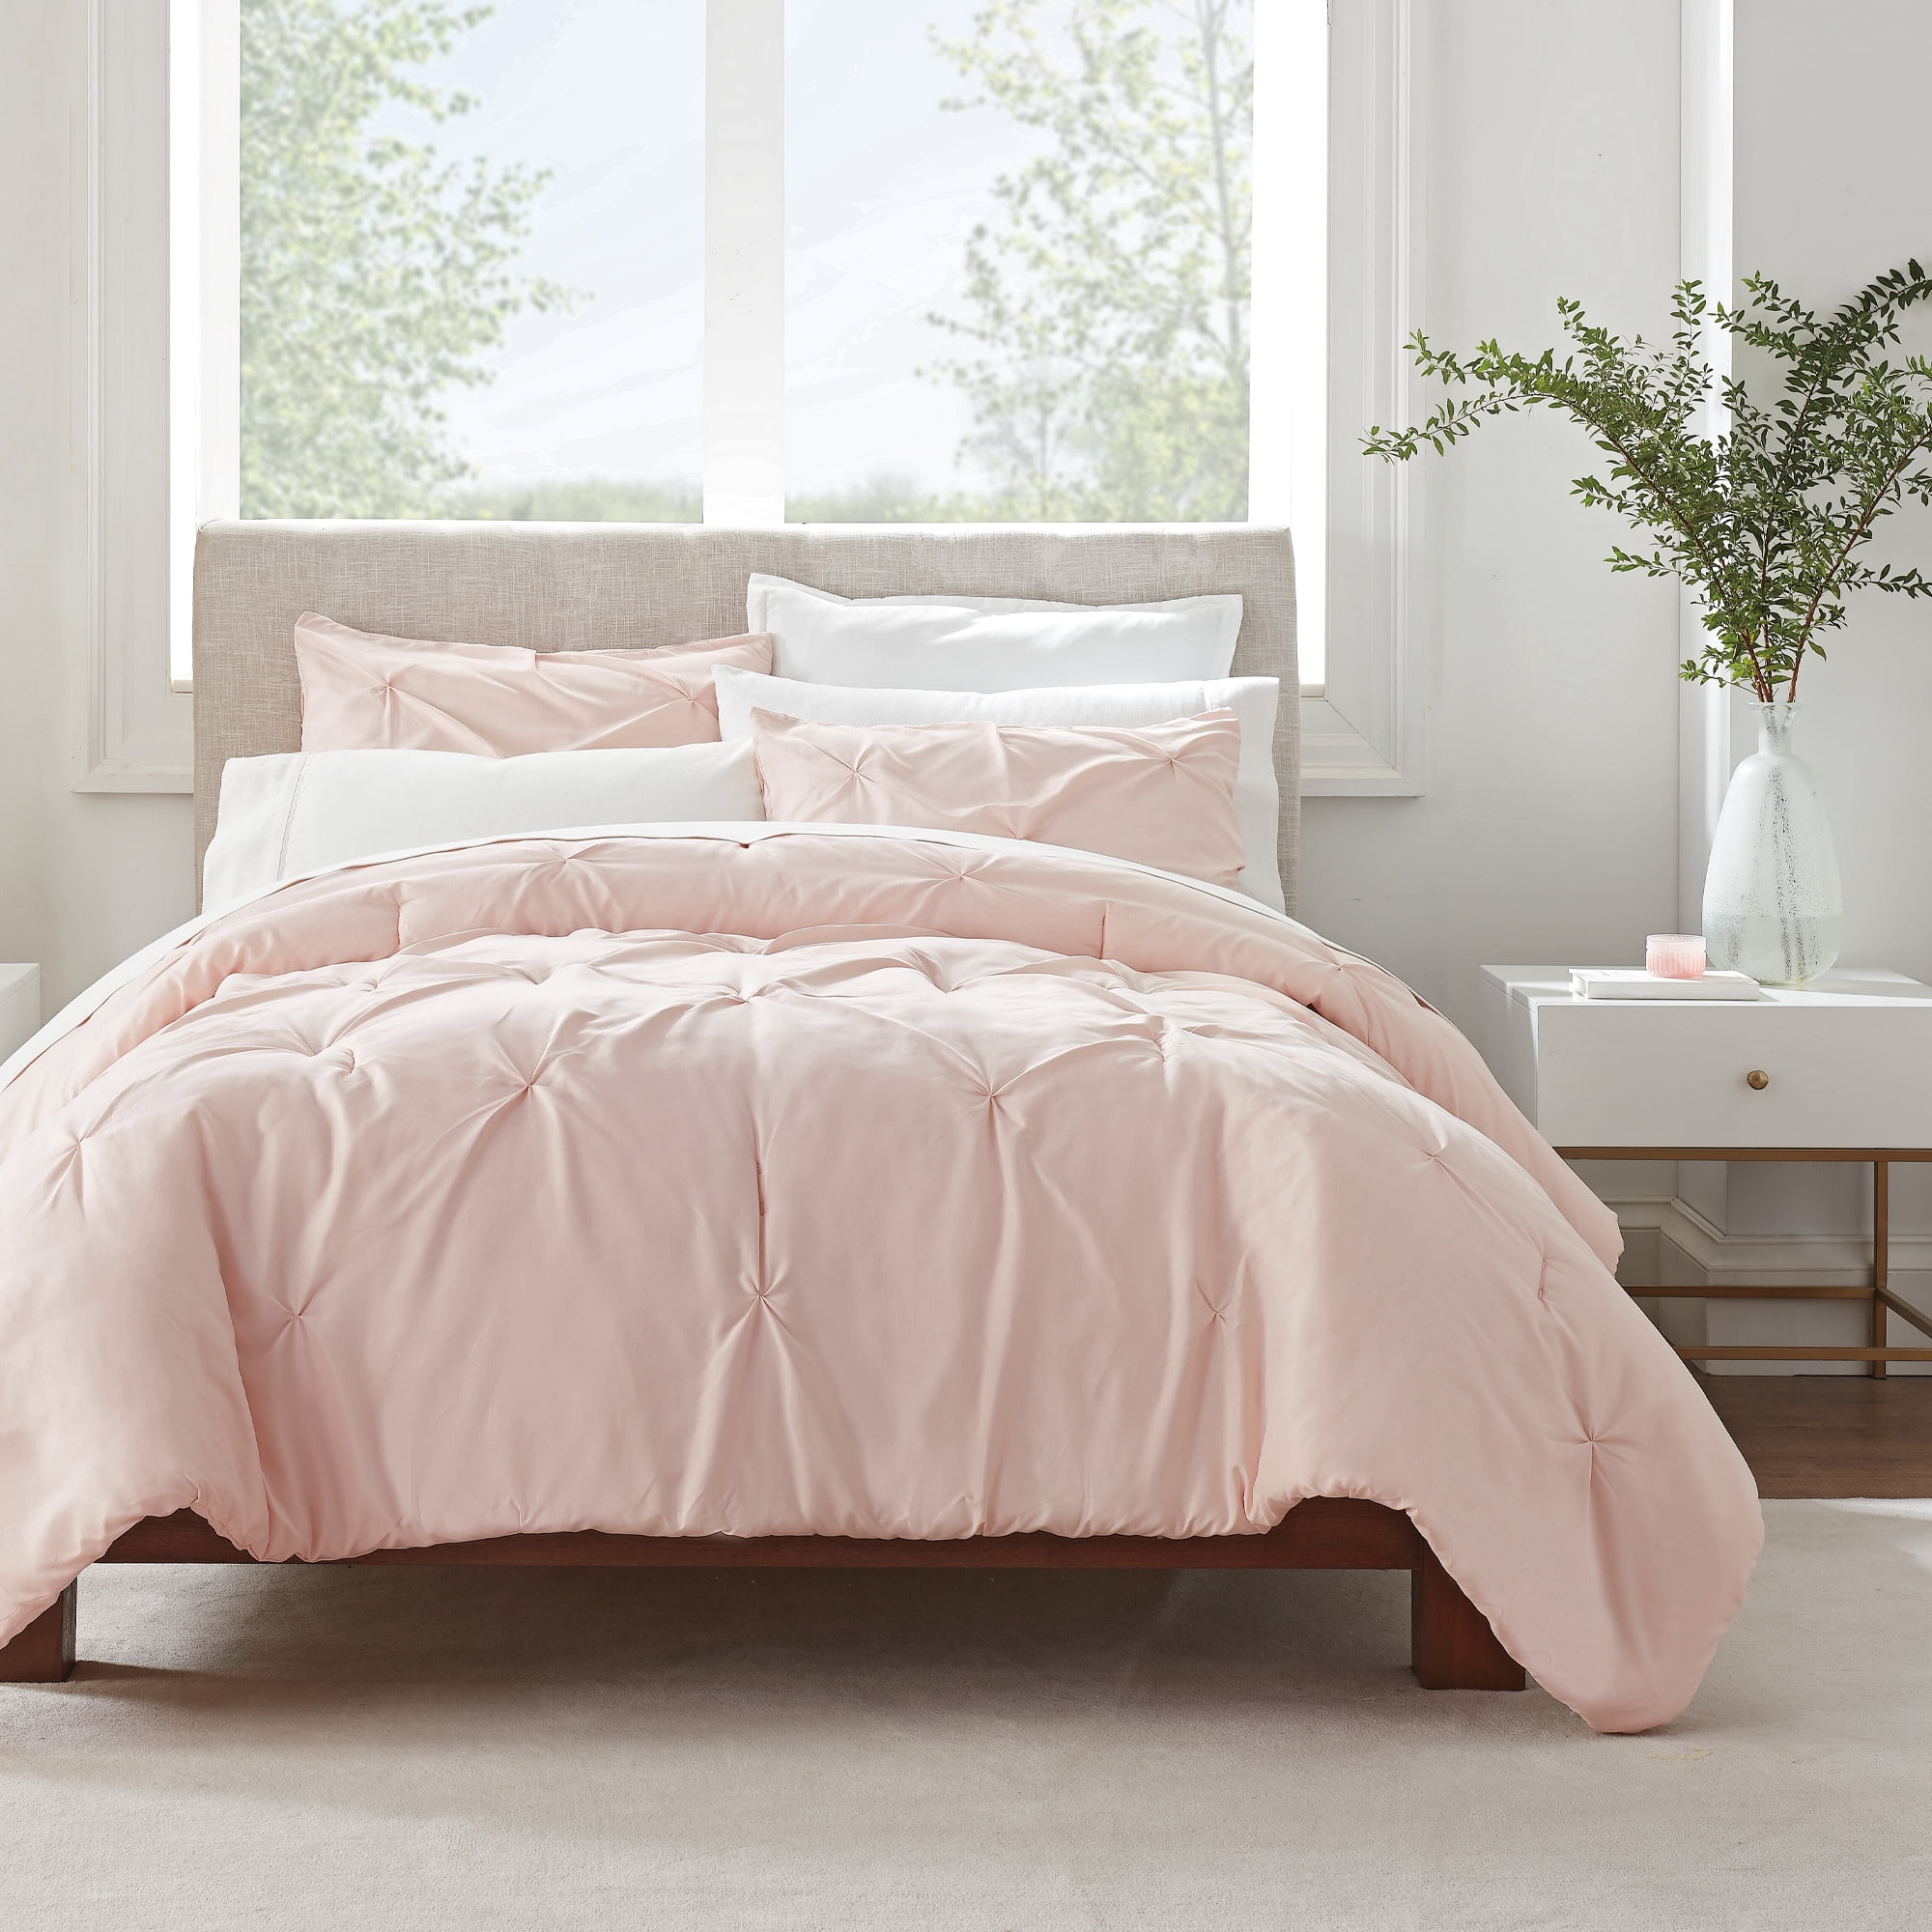 Serta Simply Clean Antimicrobial 3-Piece Blush Pink Solid Pleated Comforter  Set, Full/Queen